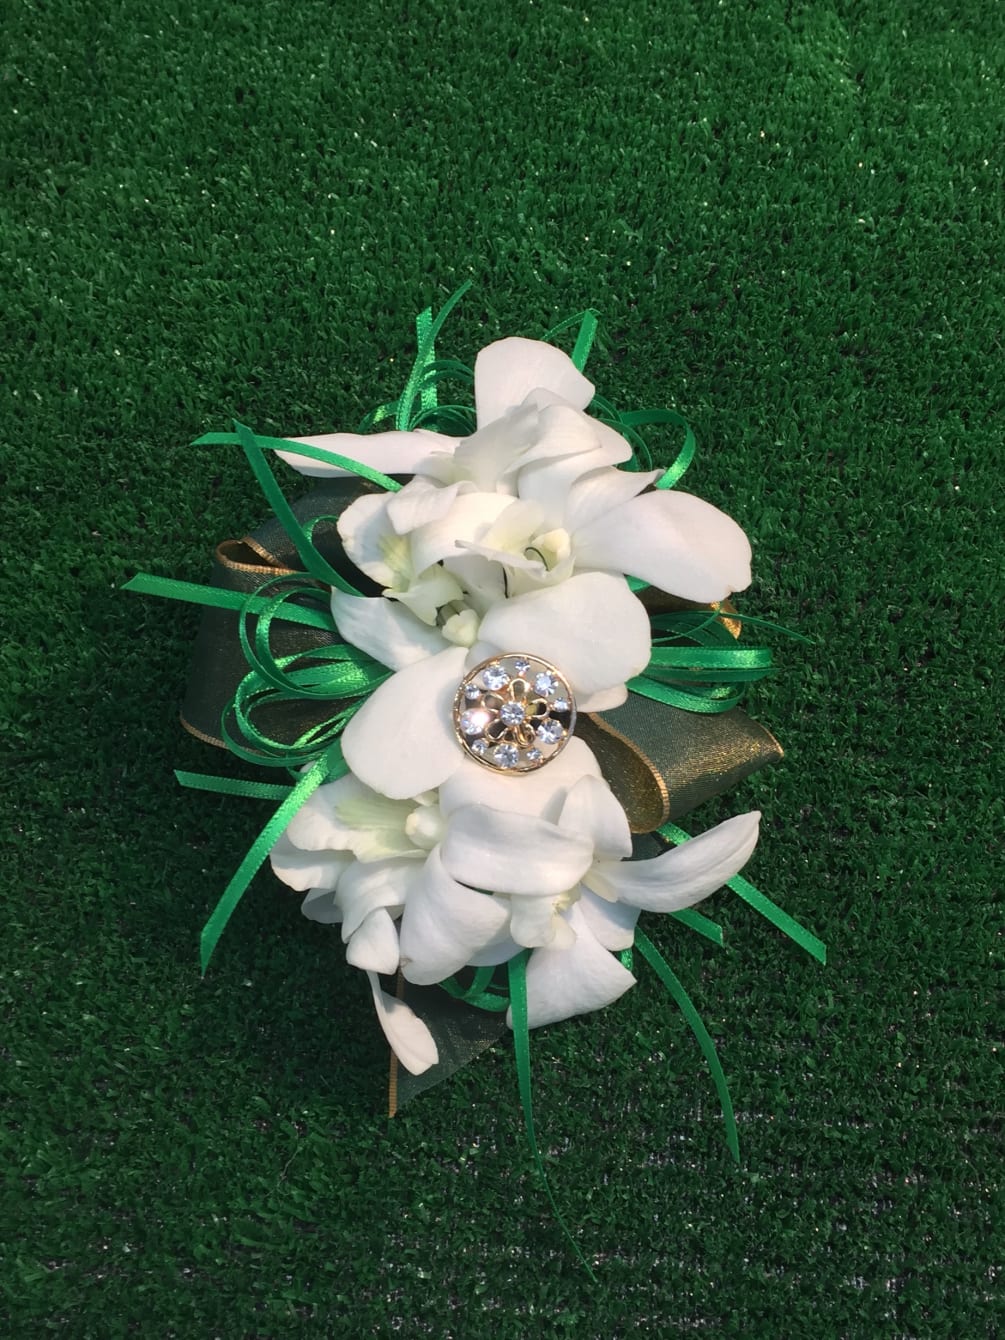 Wrist corsage with Dendrobium orchids and accents. CUSTOMER CAN CHOOSE ANY COLOR.
STANDARD: